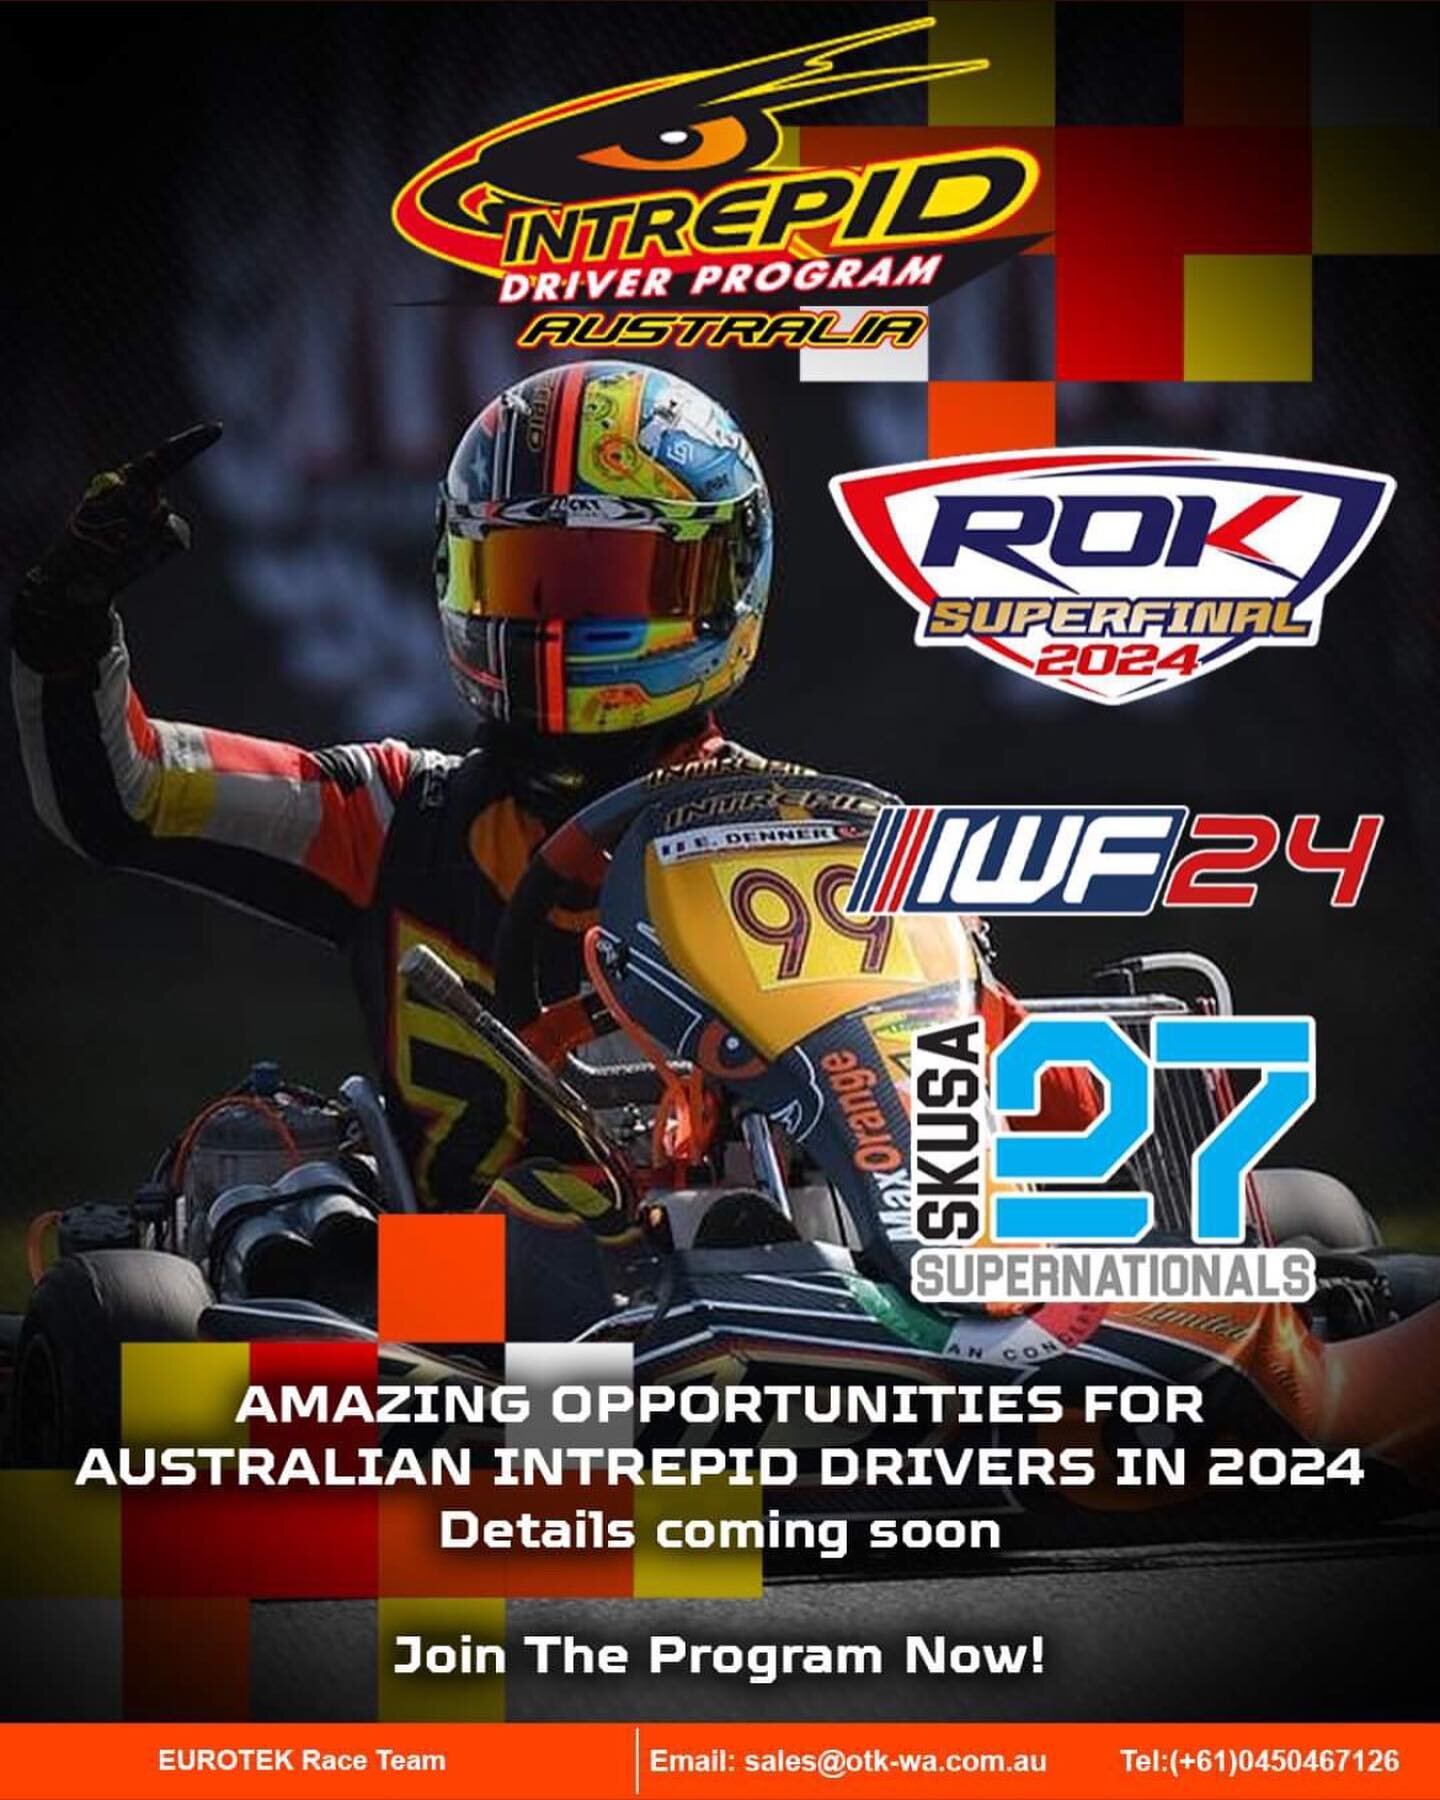 With the 2023 Karting Season all but completed, it&rsquo;s that time of year to look ahead to 2024.

In 2024, EUROTEK will pursue the WA Karting Series, AKC and selected World Finals events in the latter months. We will not look to transport karts be